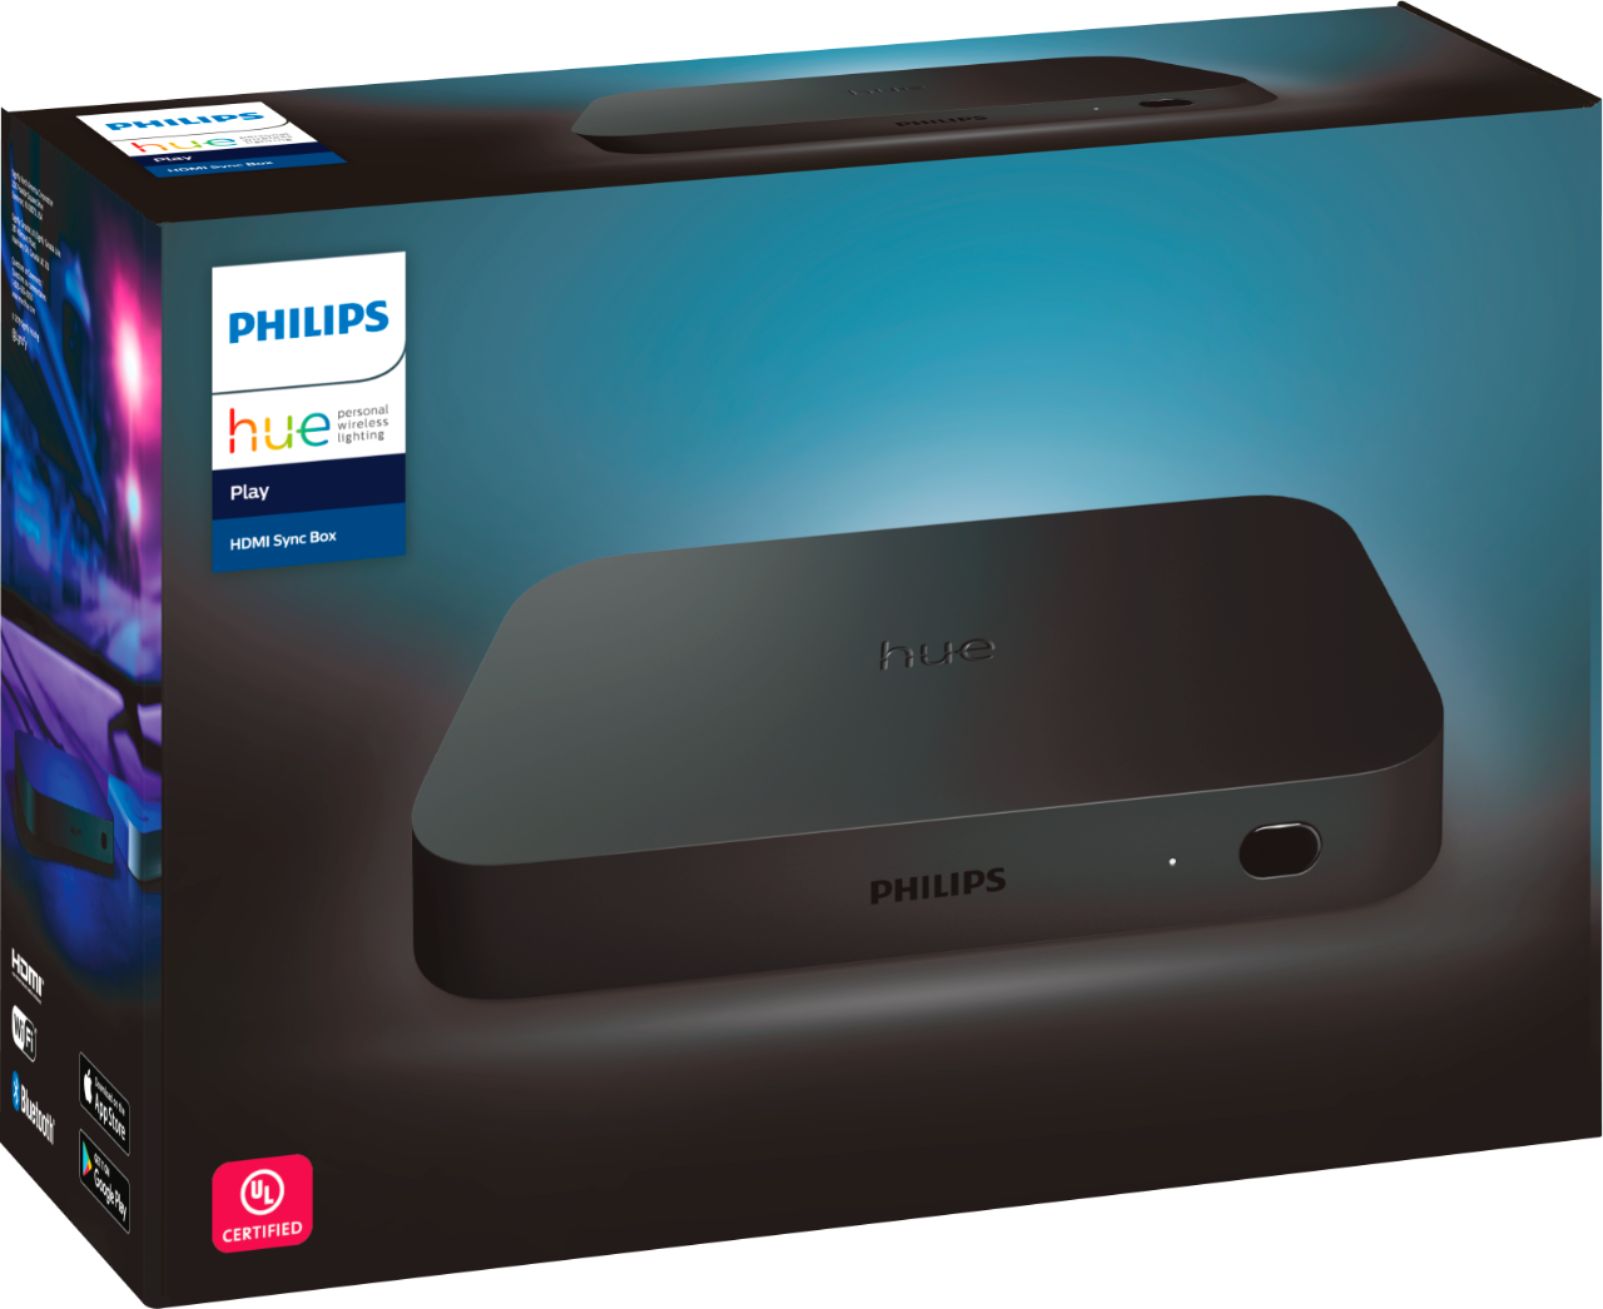 Philips Hue Play HDMI Sync Box review: Transforms your living room